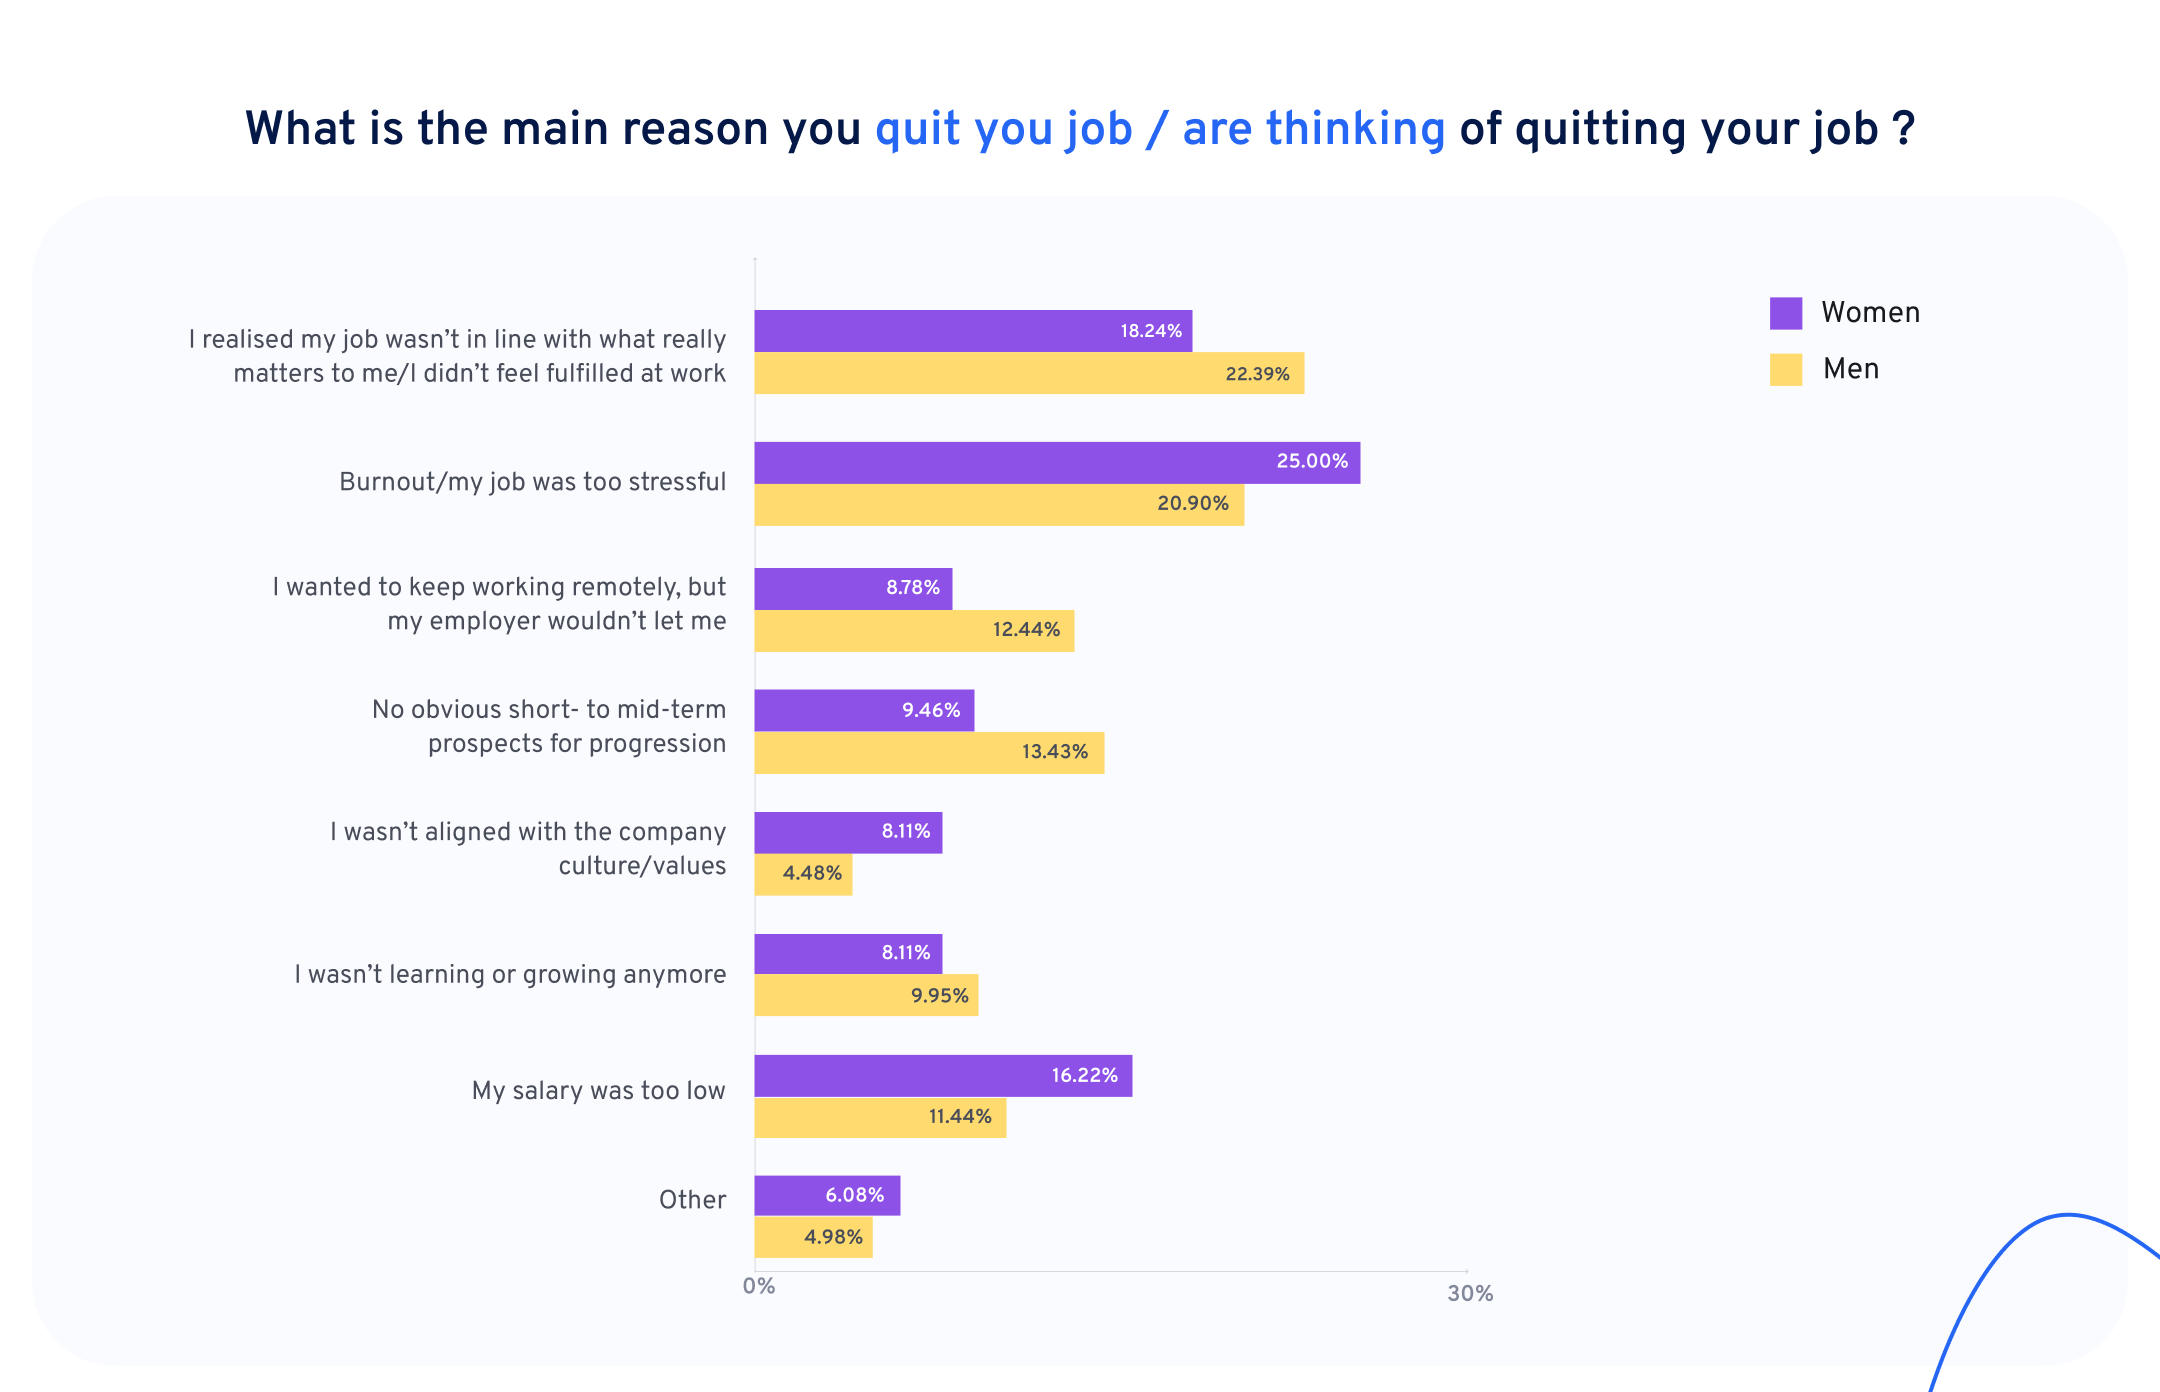 Main reasons why women and men quit their jobs